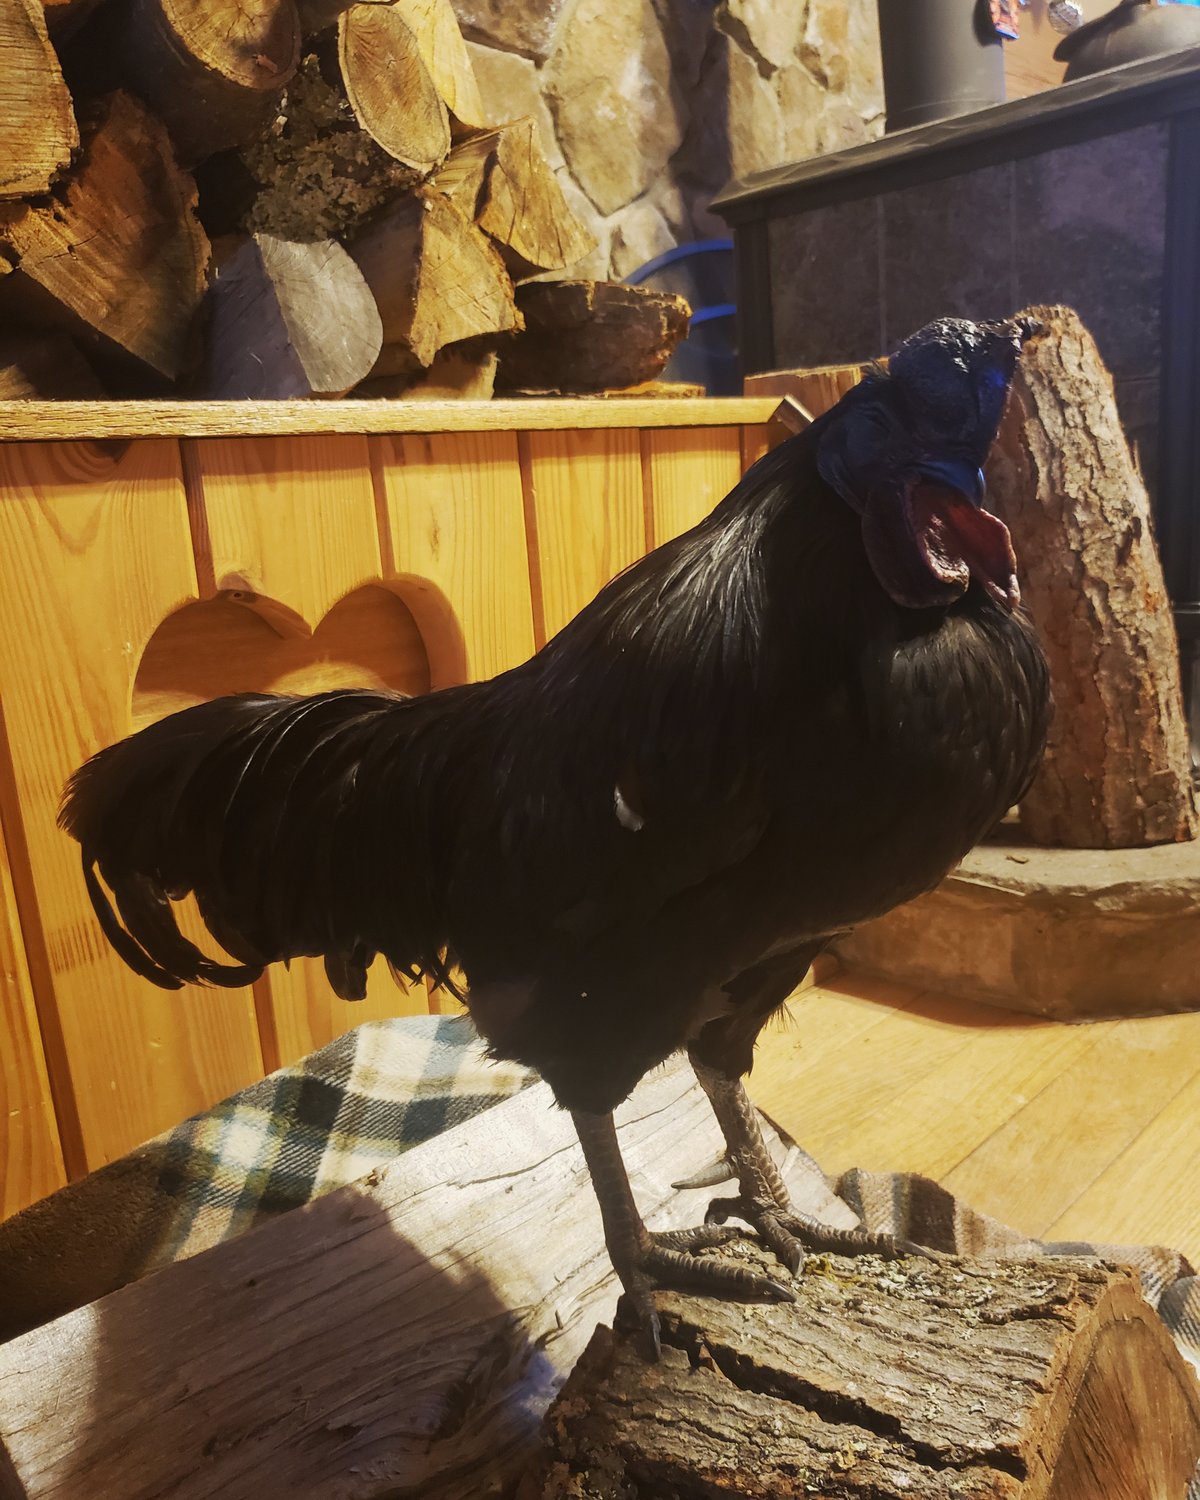 Pugsley, our oldest Ayam Cemani rooster, enjoys spending time inside the house and sleeping by the fireplace on the woodpile.